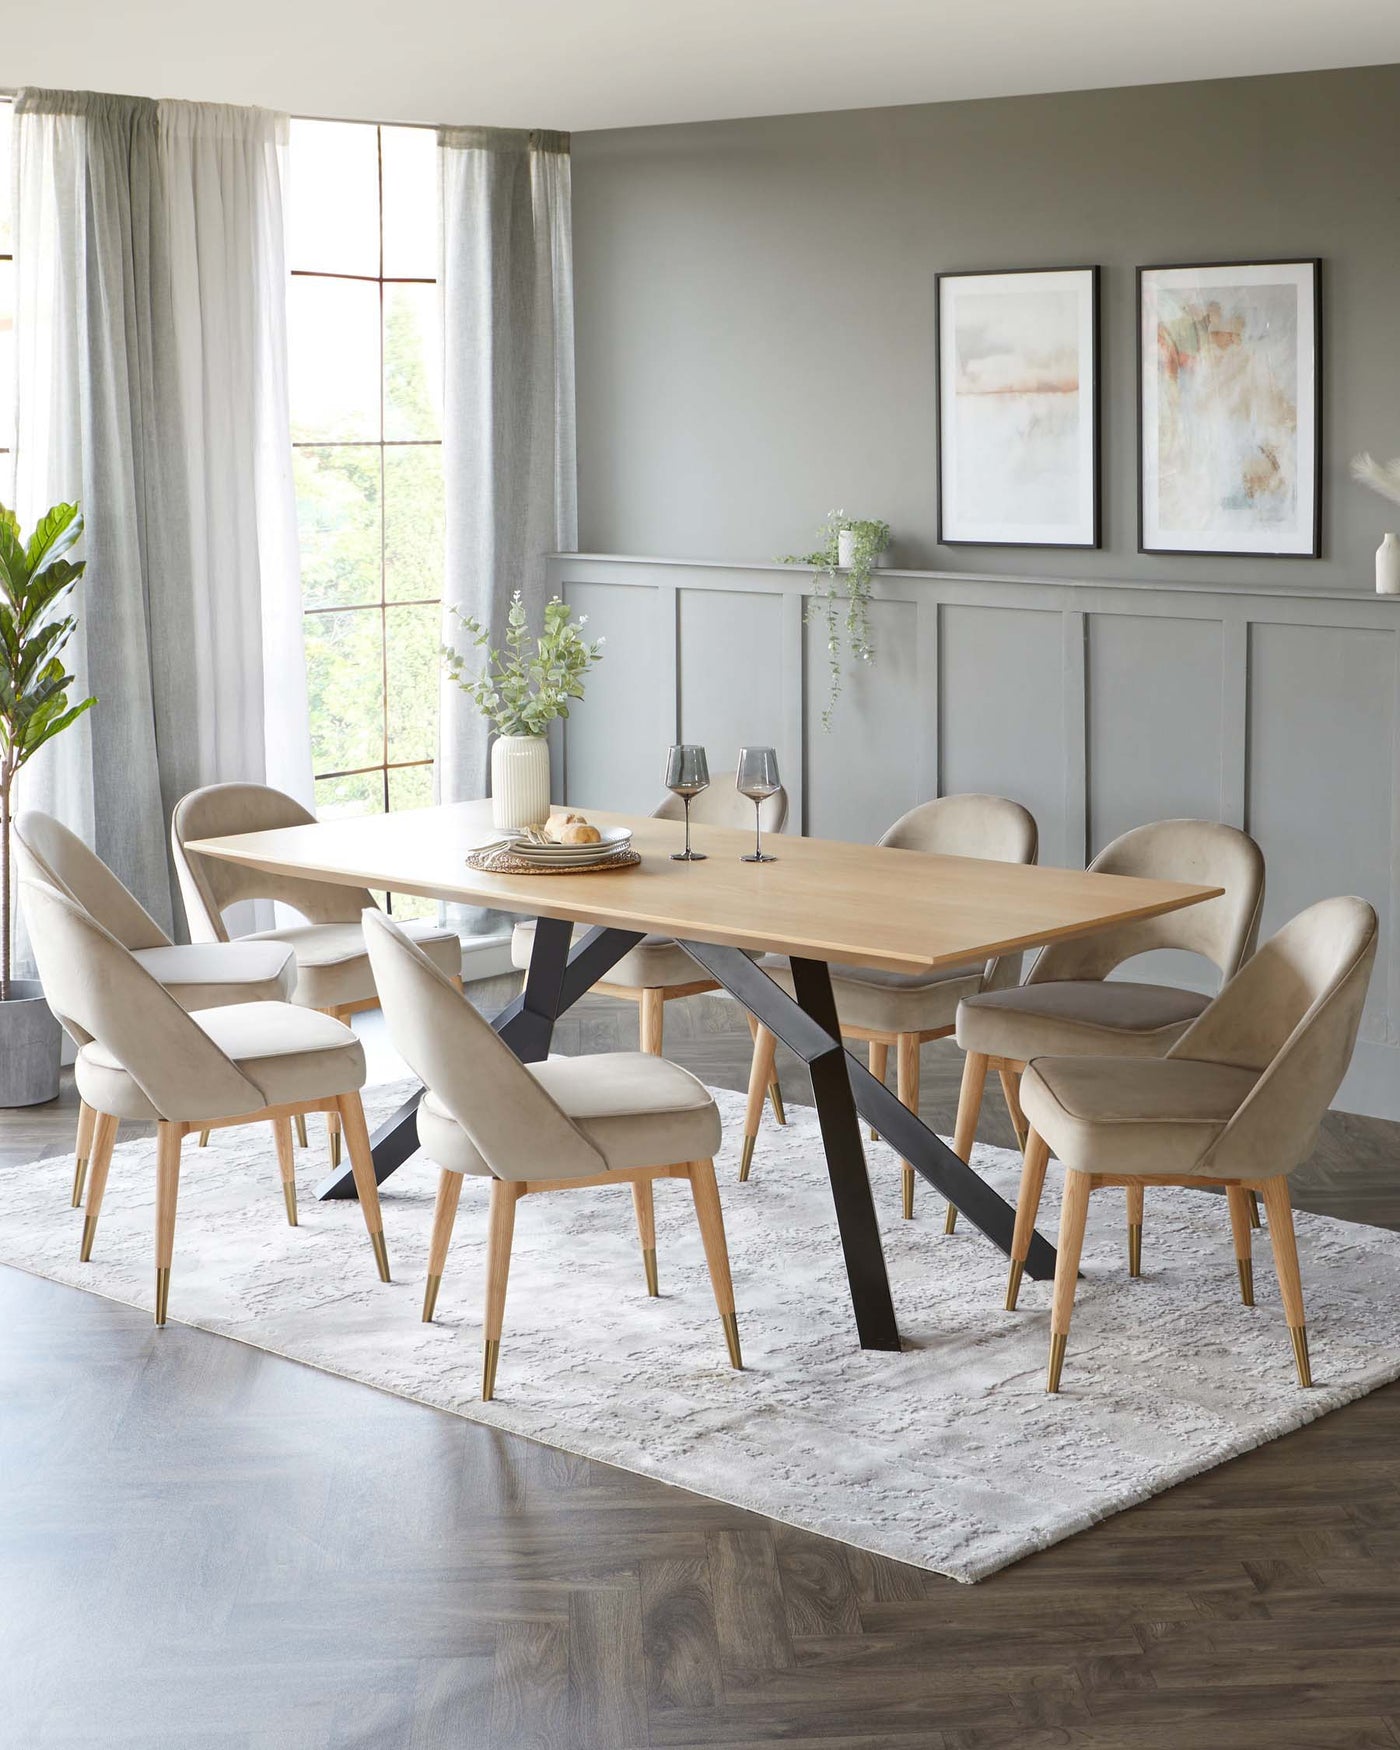 Elegant, modern dining room set featuring an oval wooden tabletop with striking black metal legs, surrounded by six plush, upholstered chairs in a cream fabric with light wood legs accented with gold tips. The set is presented on a textured white area rug.